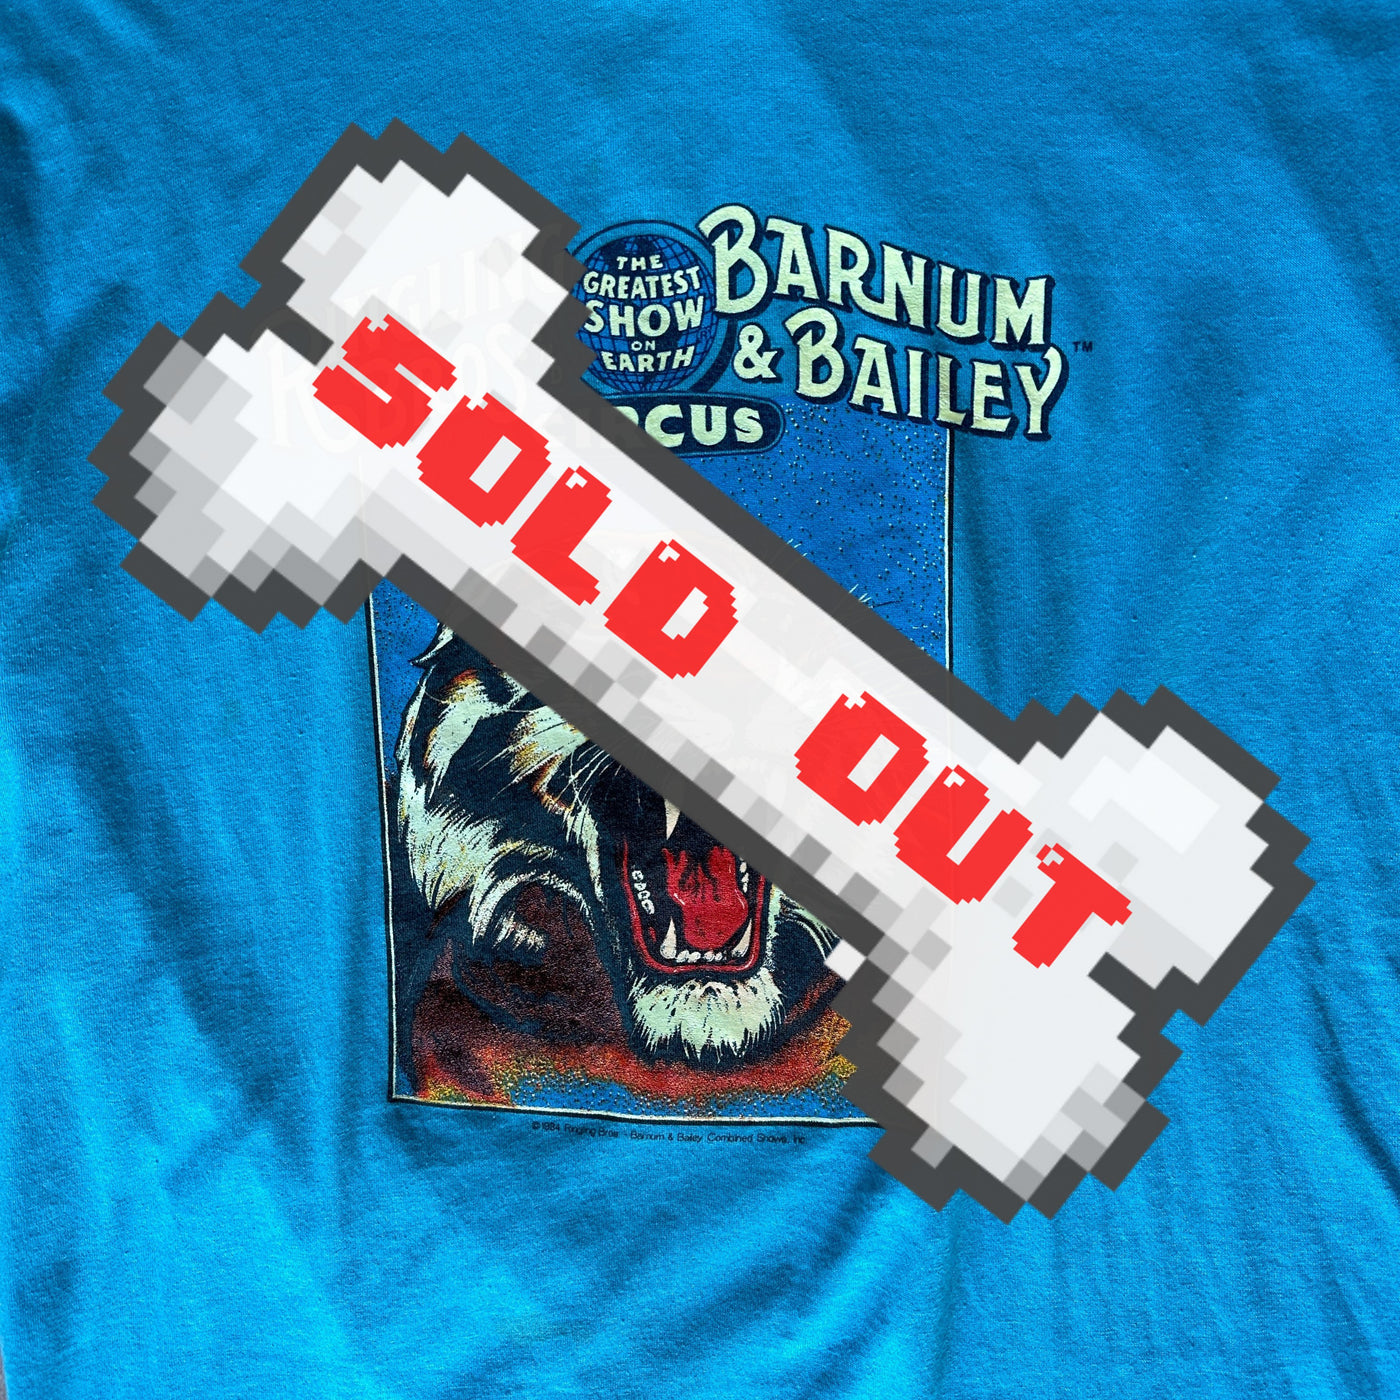 1984 Turquoise “Ringling Bros. and Barnum & Bailey Circus” T-Shirt